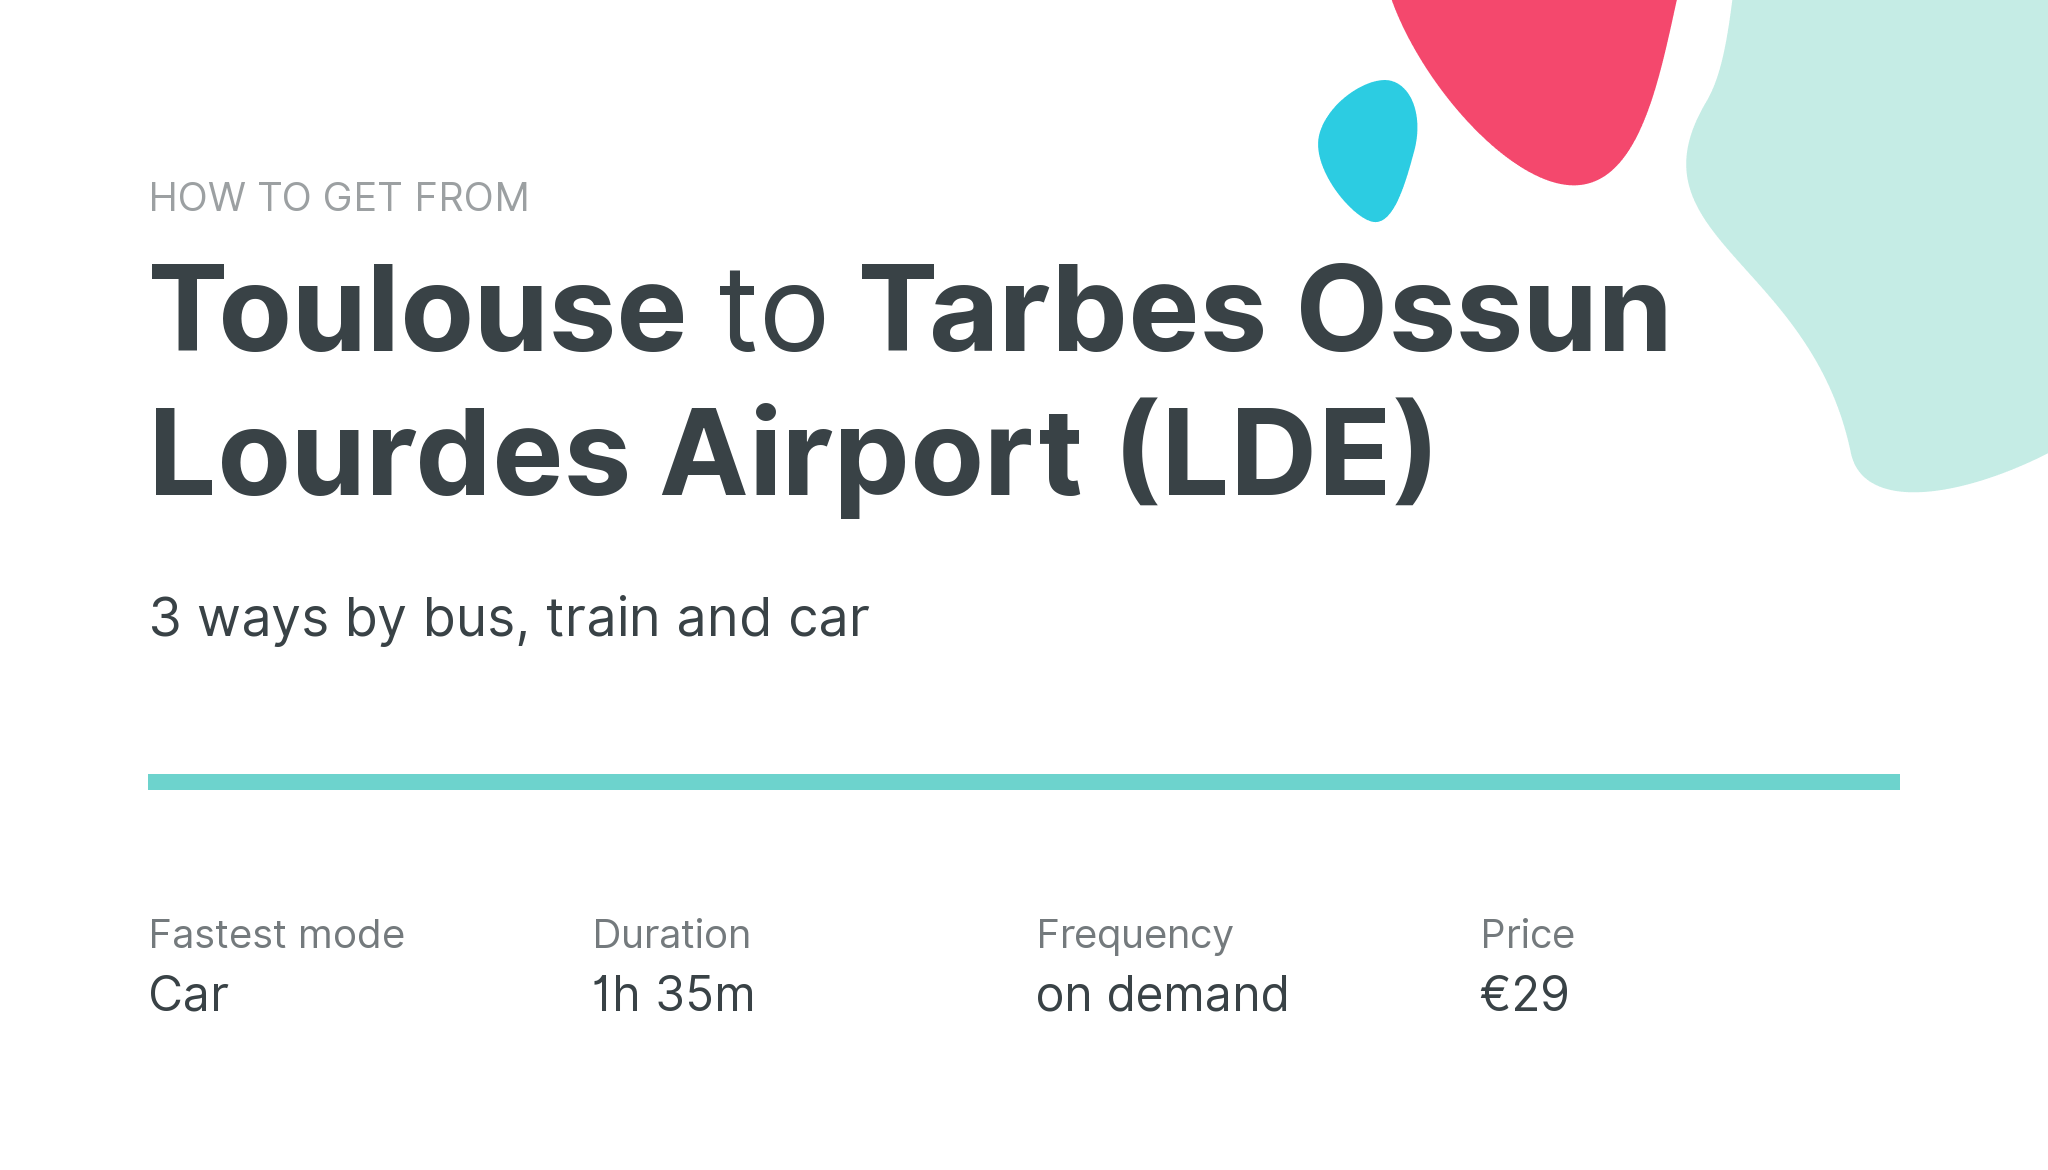 How do I get from Toulouse to Tarbes Ossun Lourdes Airport (LDE)